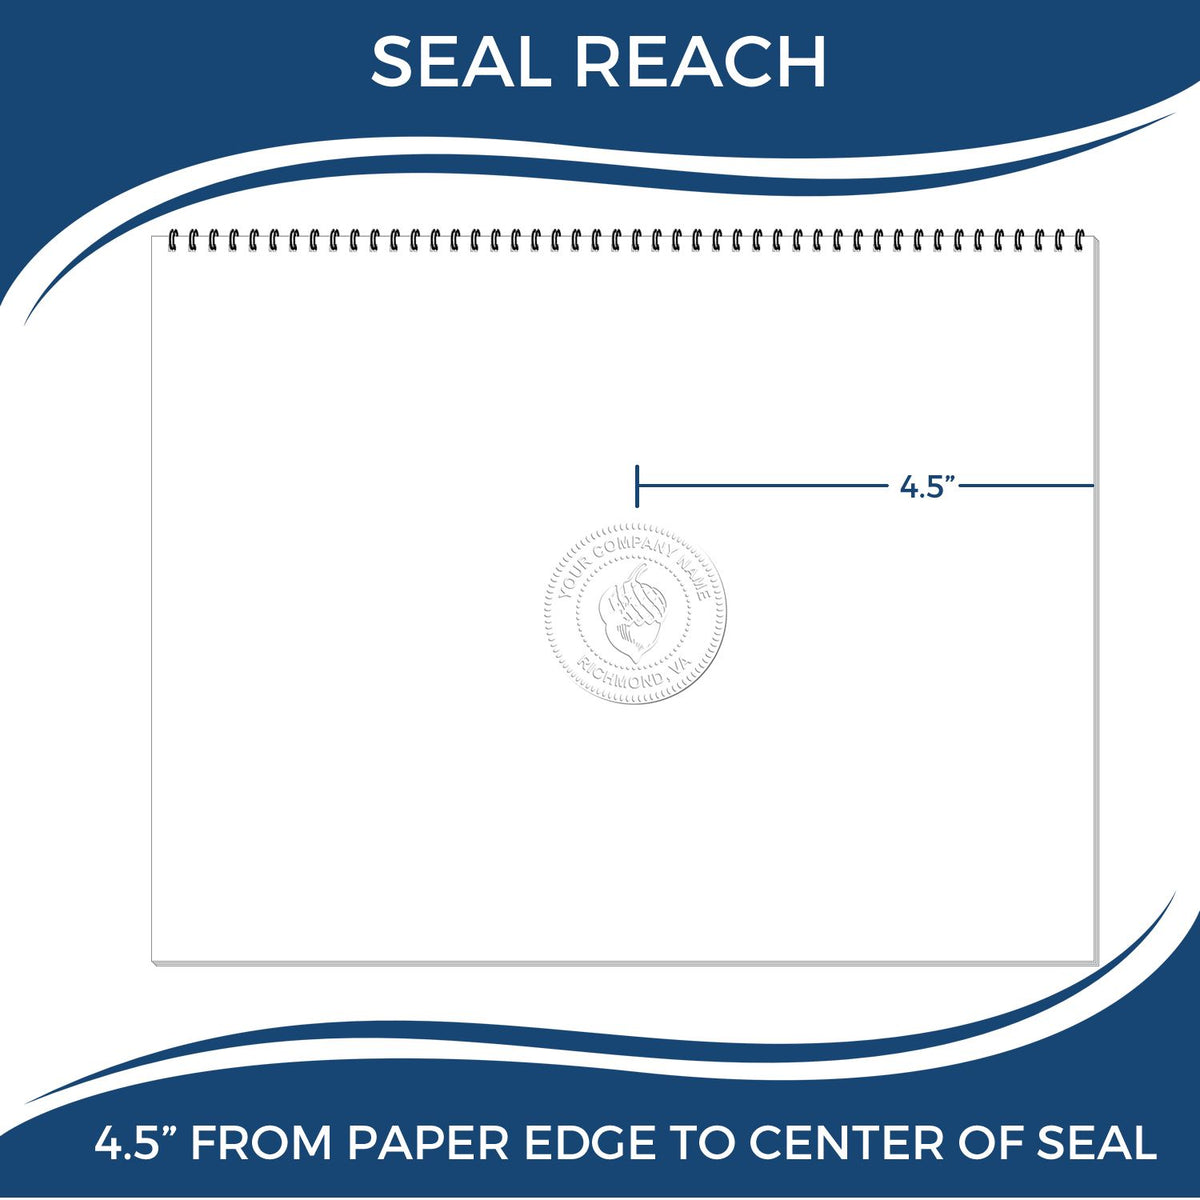 An infographic showing the seal reach which is represented by a ruler and a miniature seal image of the State of Idaho Extended Long Reach Geologist Seal